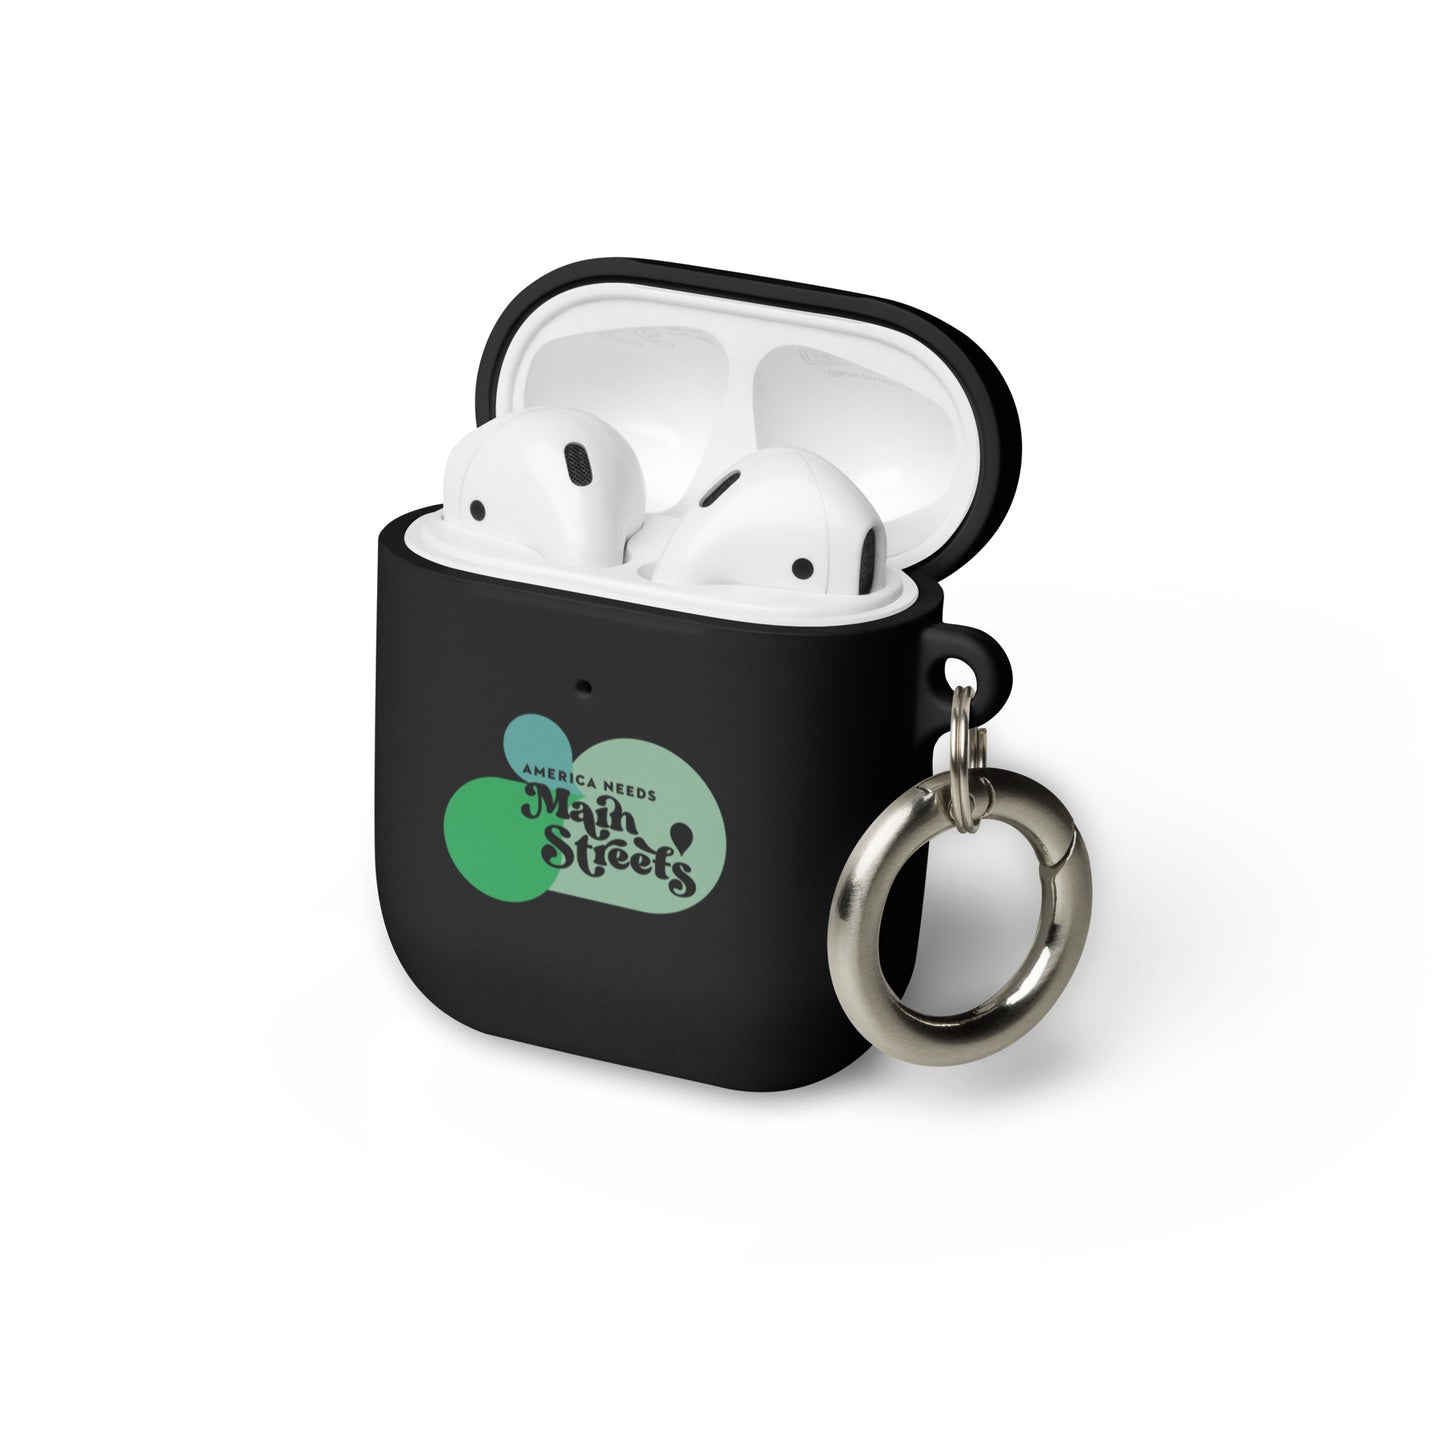 "America Needs Main Streets" (Green) Rubber Case for AirPods®